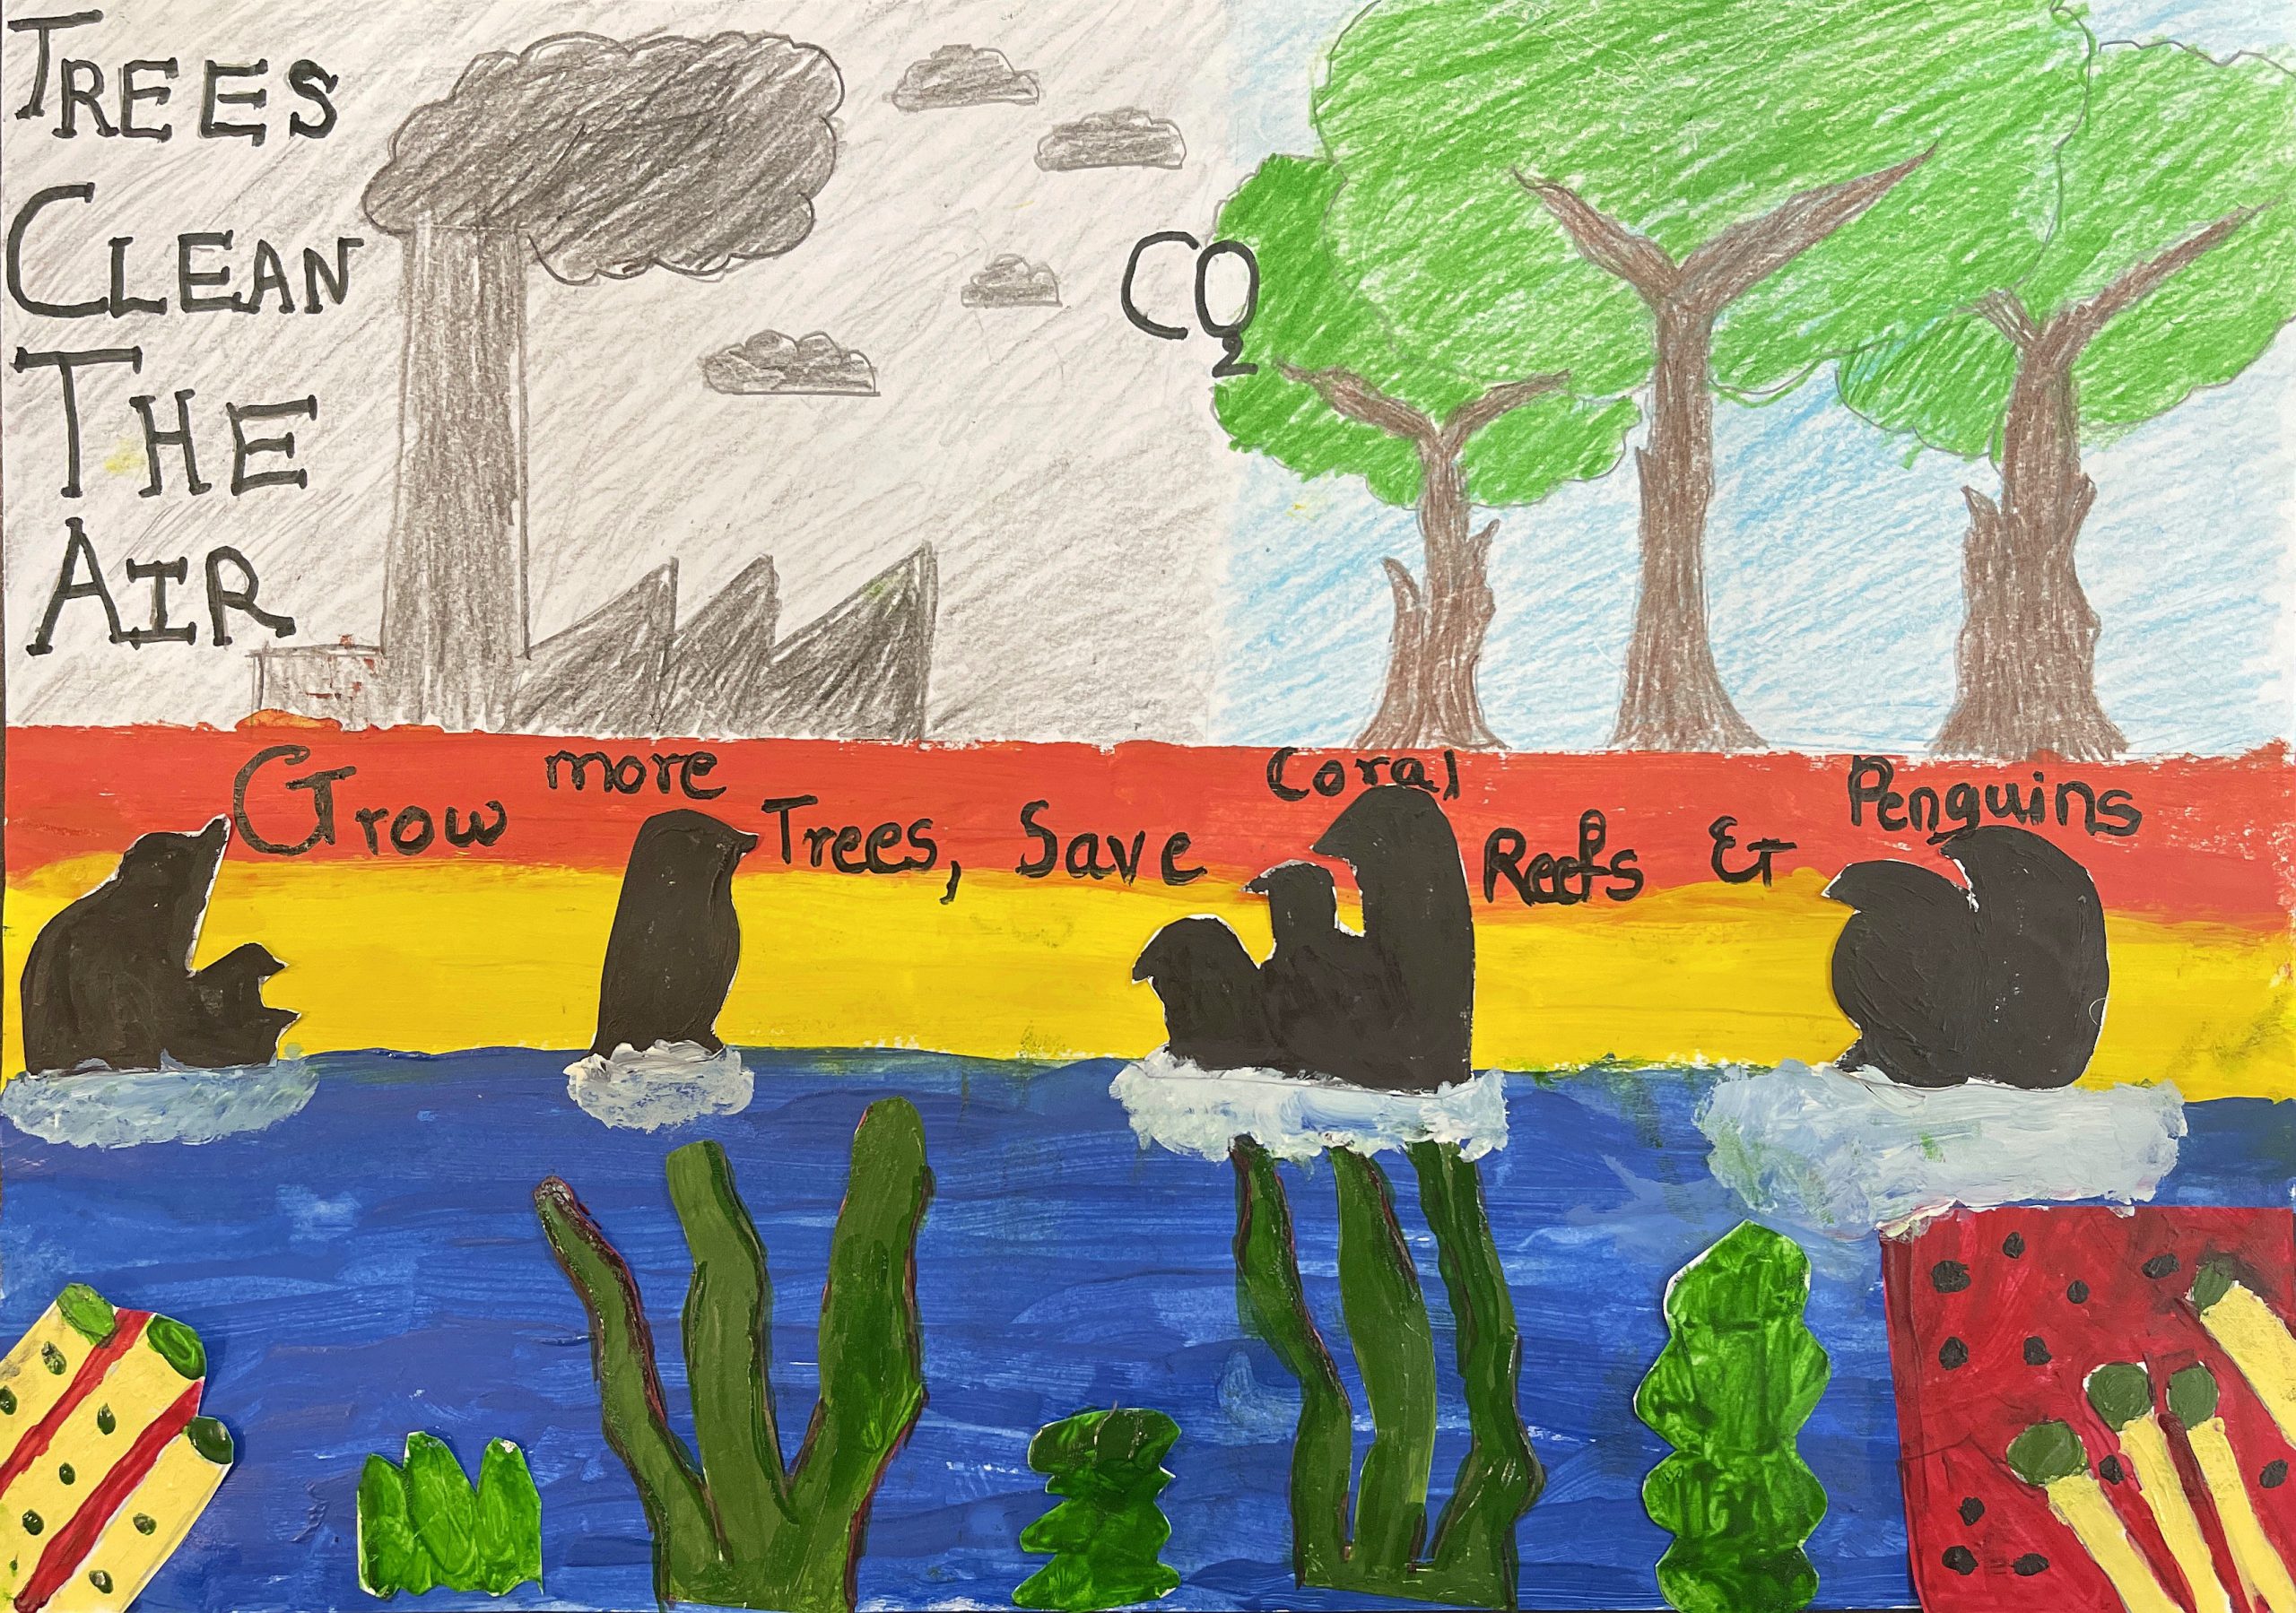 Save trees, save earth - Kids Care About Climate Change 2021